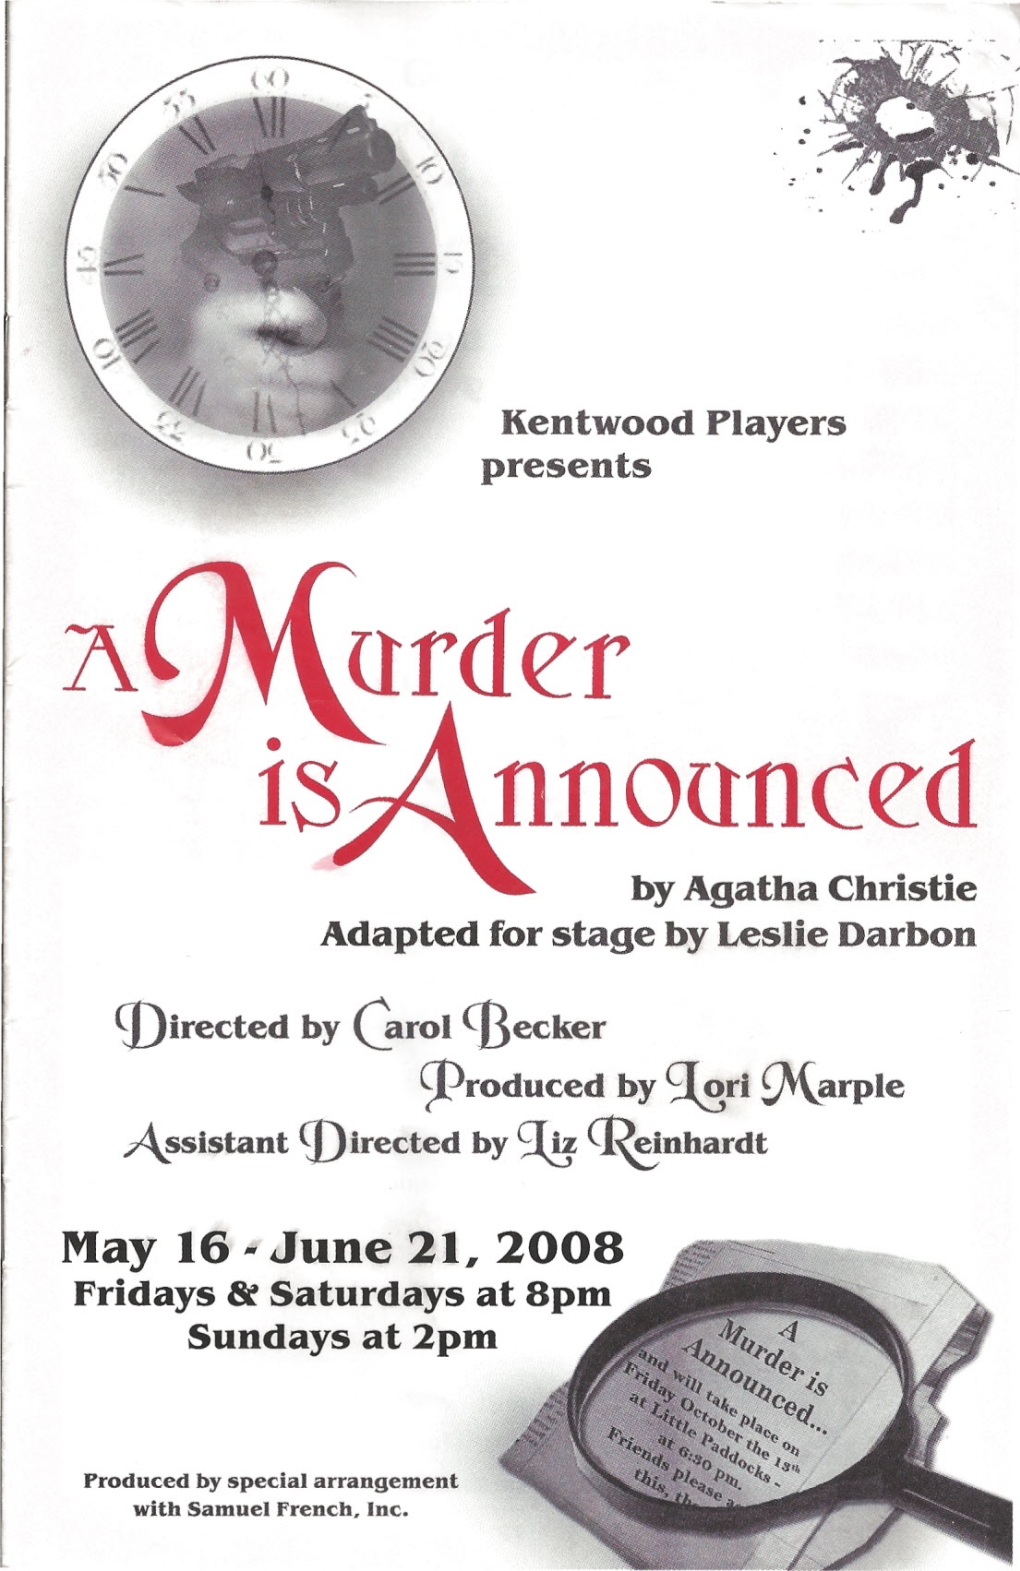 Program for "A Murder Is Announced"